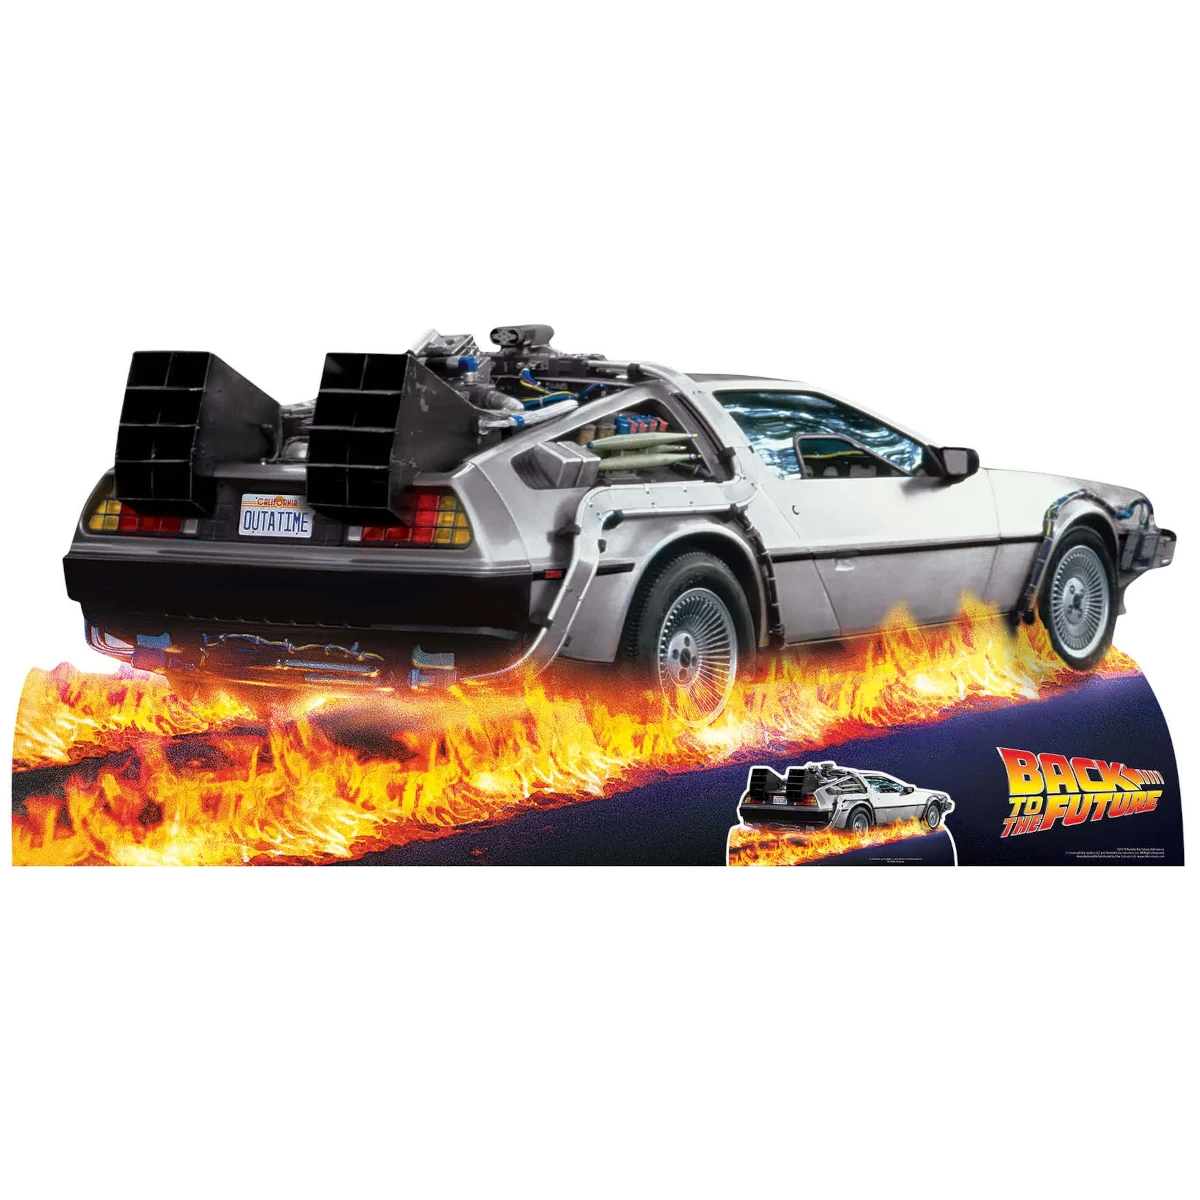 SC1574 DeLorean Car (Back To The Future) Official Large + Mini Cardboard Cutout Standee Front